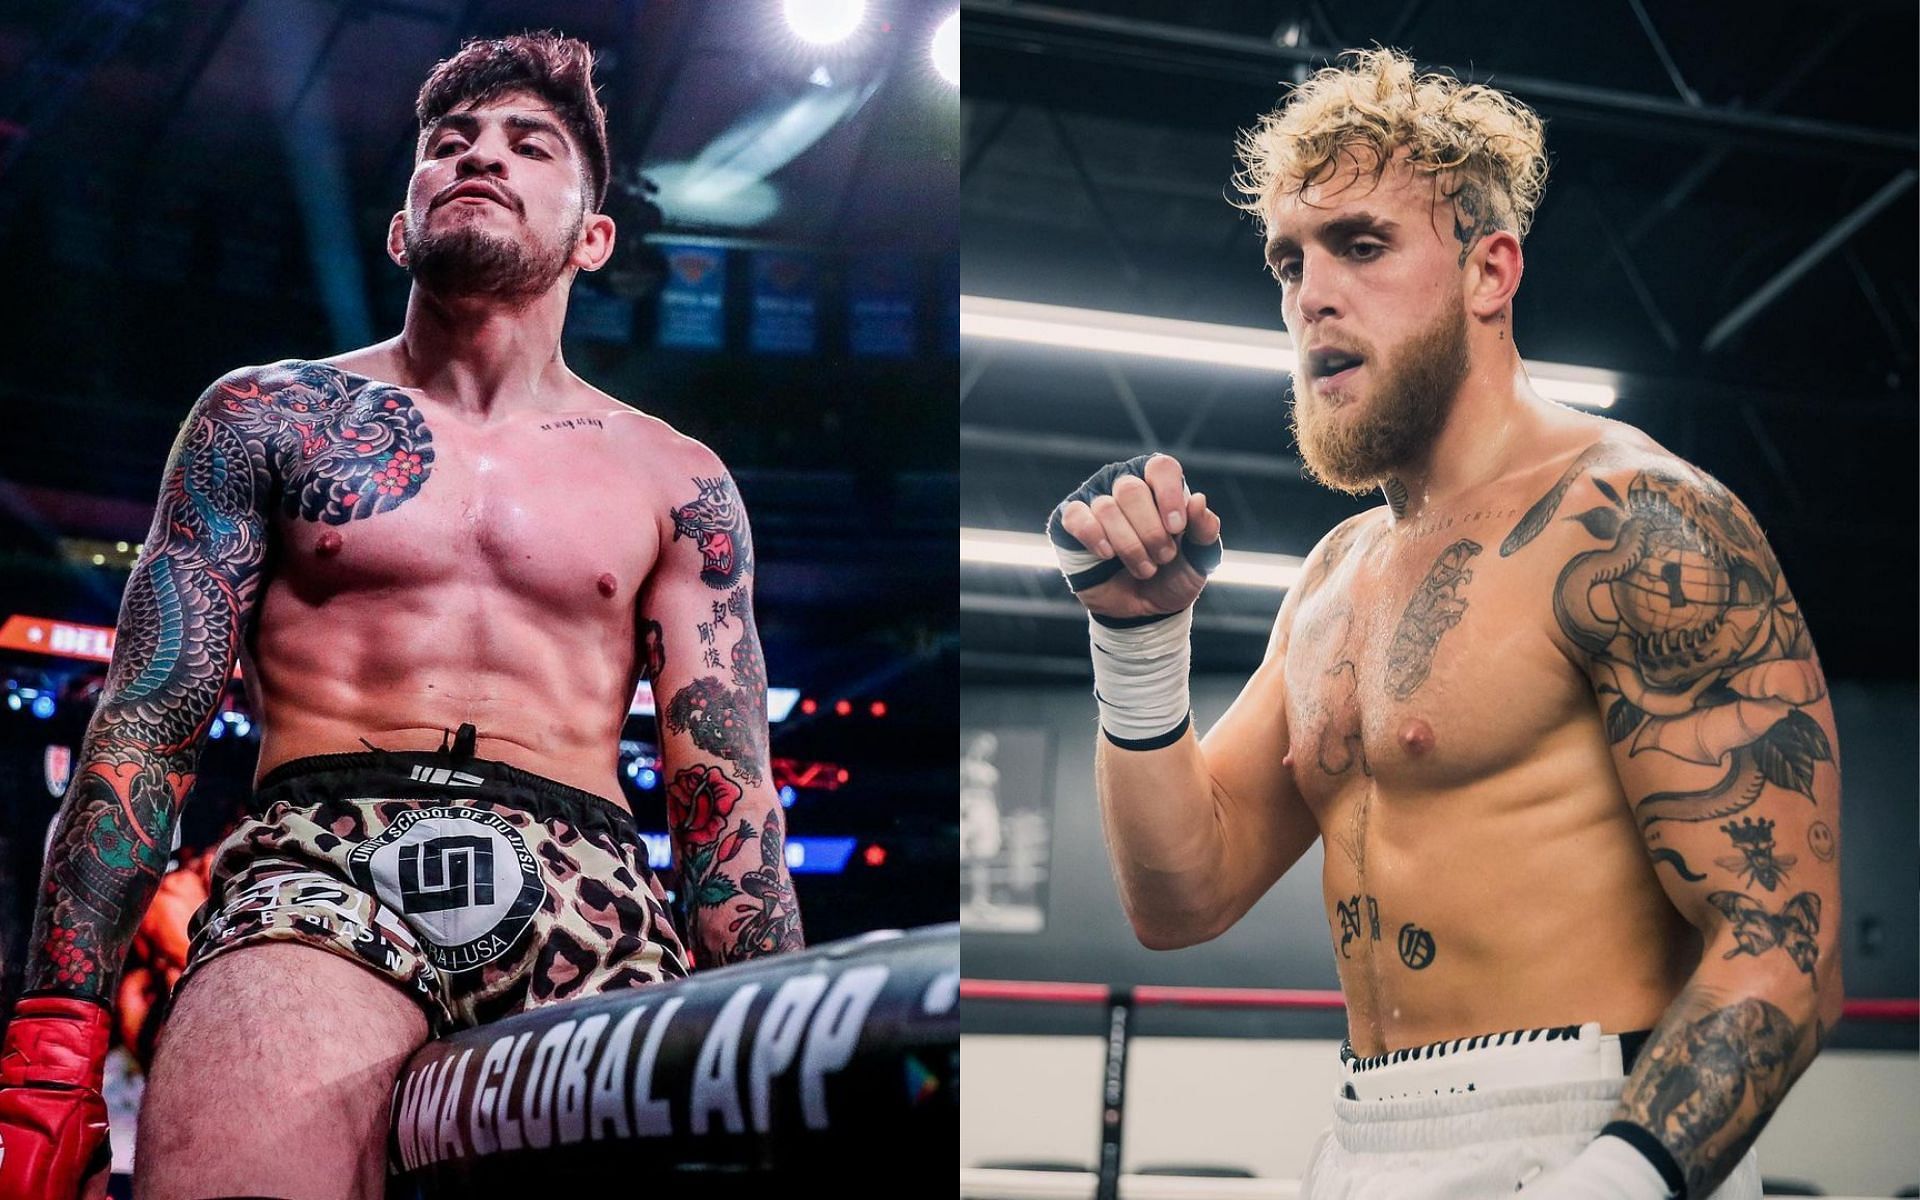 Dillon Danis (left) and Jake Paul (right) [Image Courtesy: @dillondanis and @jakepaul on Instagram]